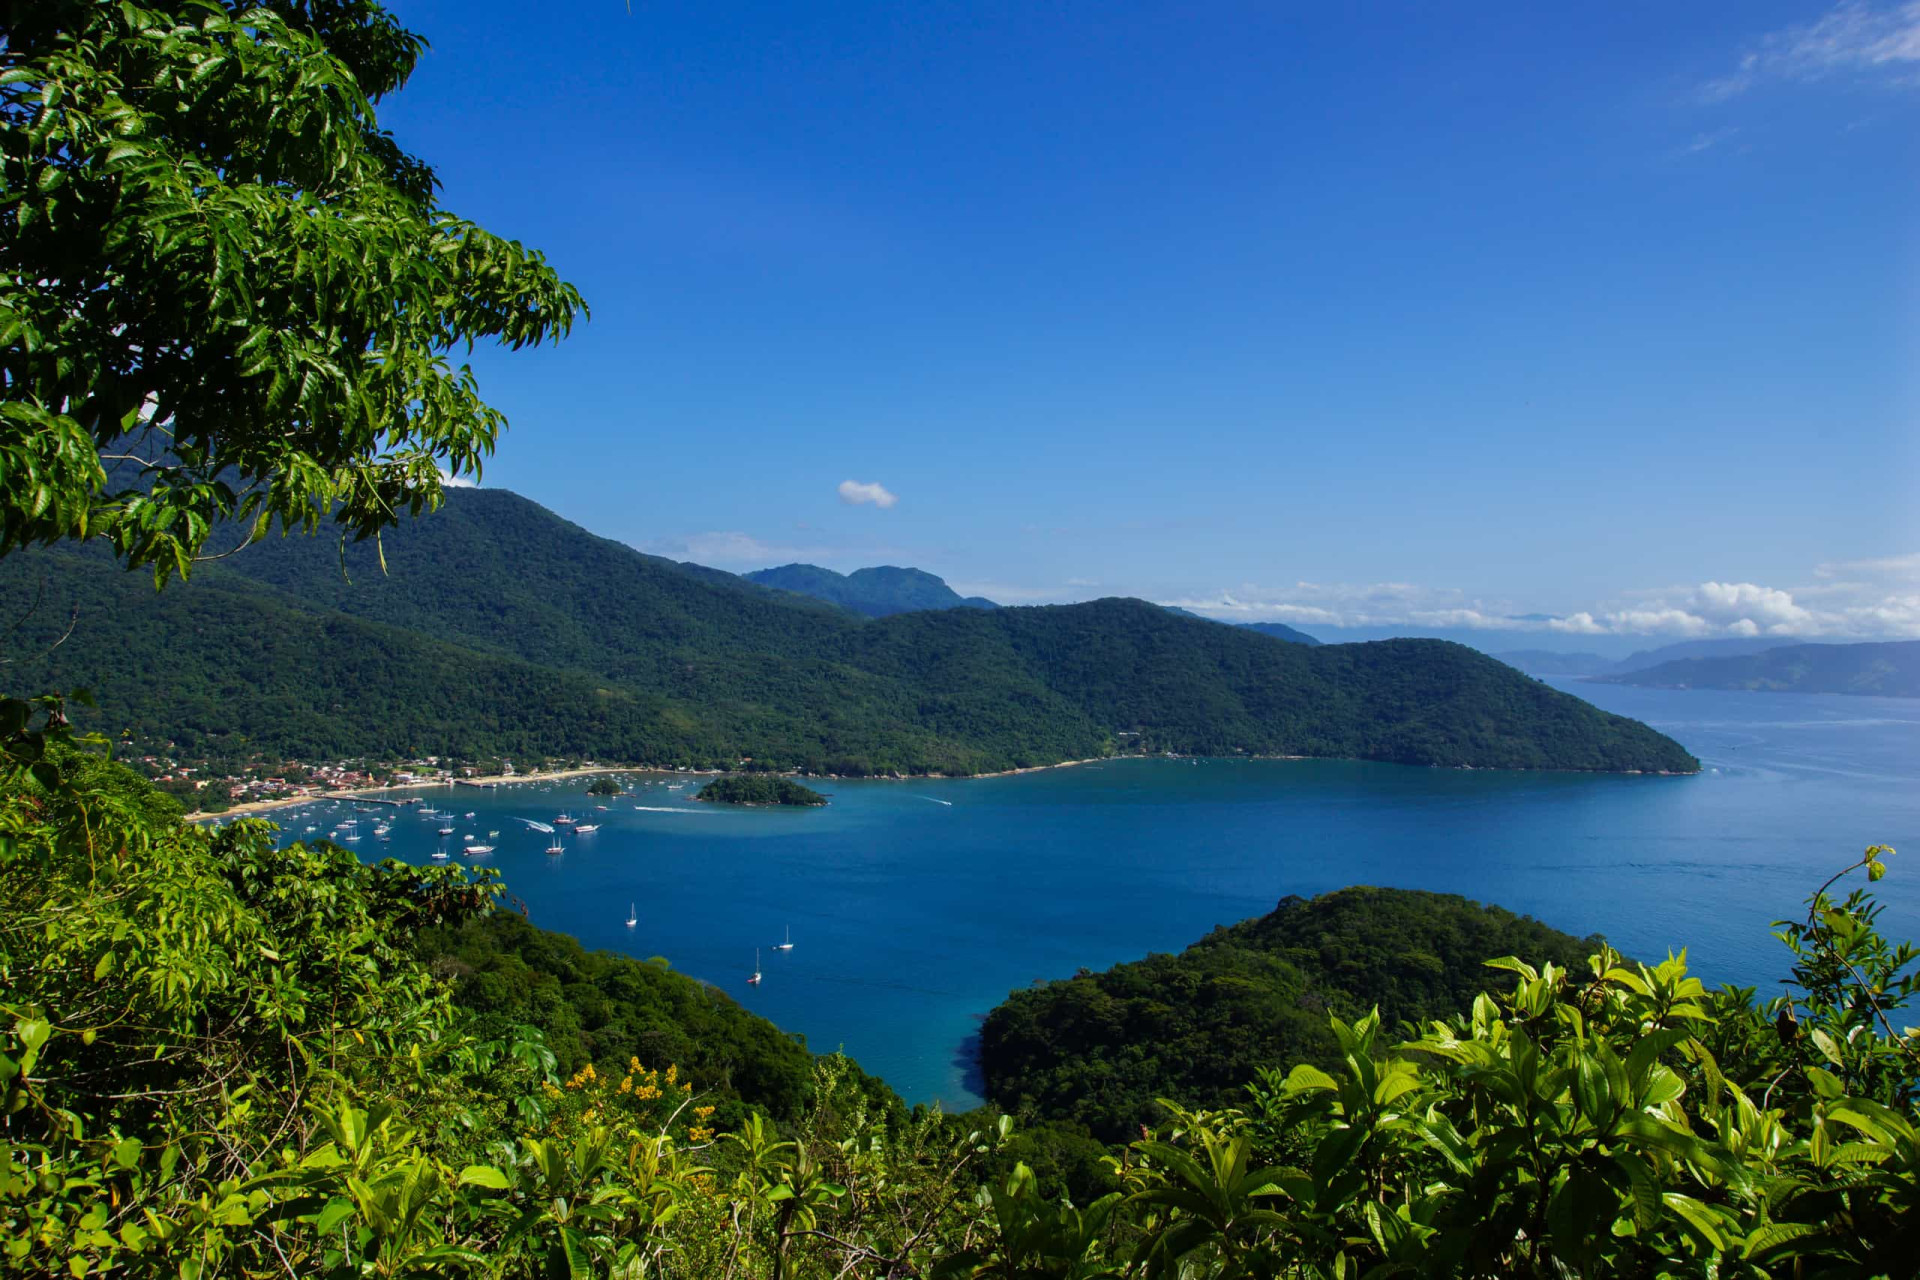 Location: Rio de Janeiro state<br>Criteria: Mixed<br>Year established: 2019<br>Description: Ilha Grande, a hotspot for biodiversity and conservation, is also noted for its scenic beauty, pristine tropical beaches, and rugged, verdant landscape.<p><a href="https://www.msn.com/en-us/community/channel/vid-7xx8mnucu55yw63we9va2gwr7uihbxwc68fxqp25x6tg4ftibpra?cvid=94631541bc0f4f89bfd59158d696ad7e">Follow us and access great exclusive content every day</a></p>